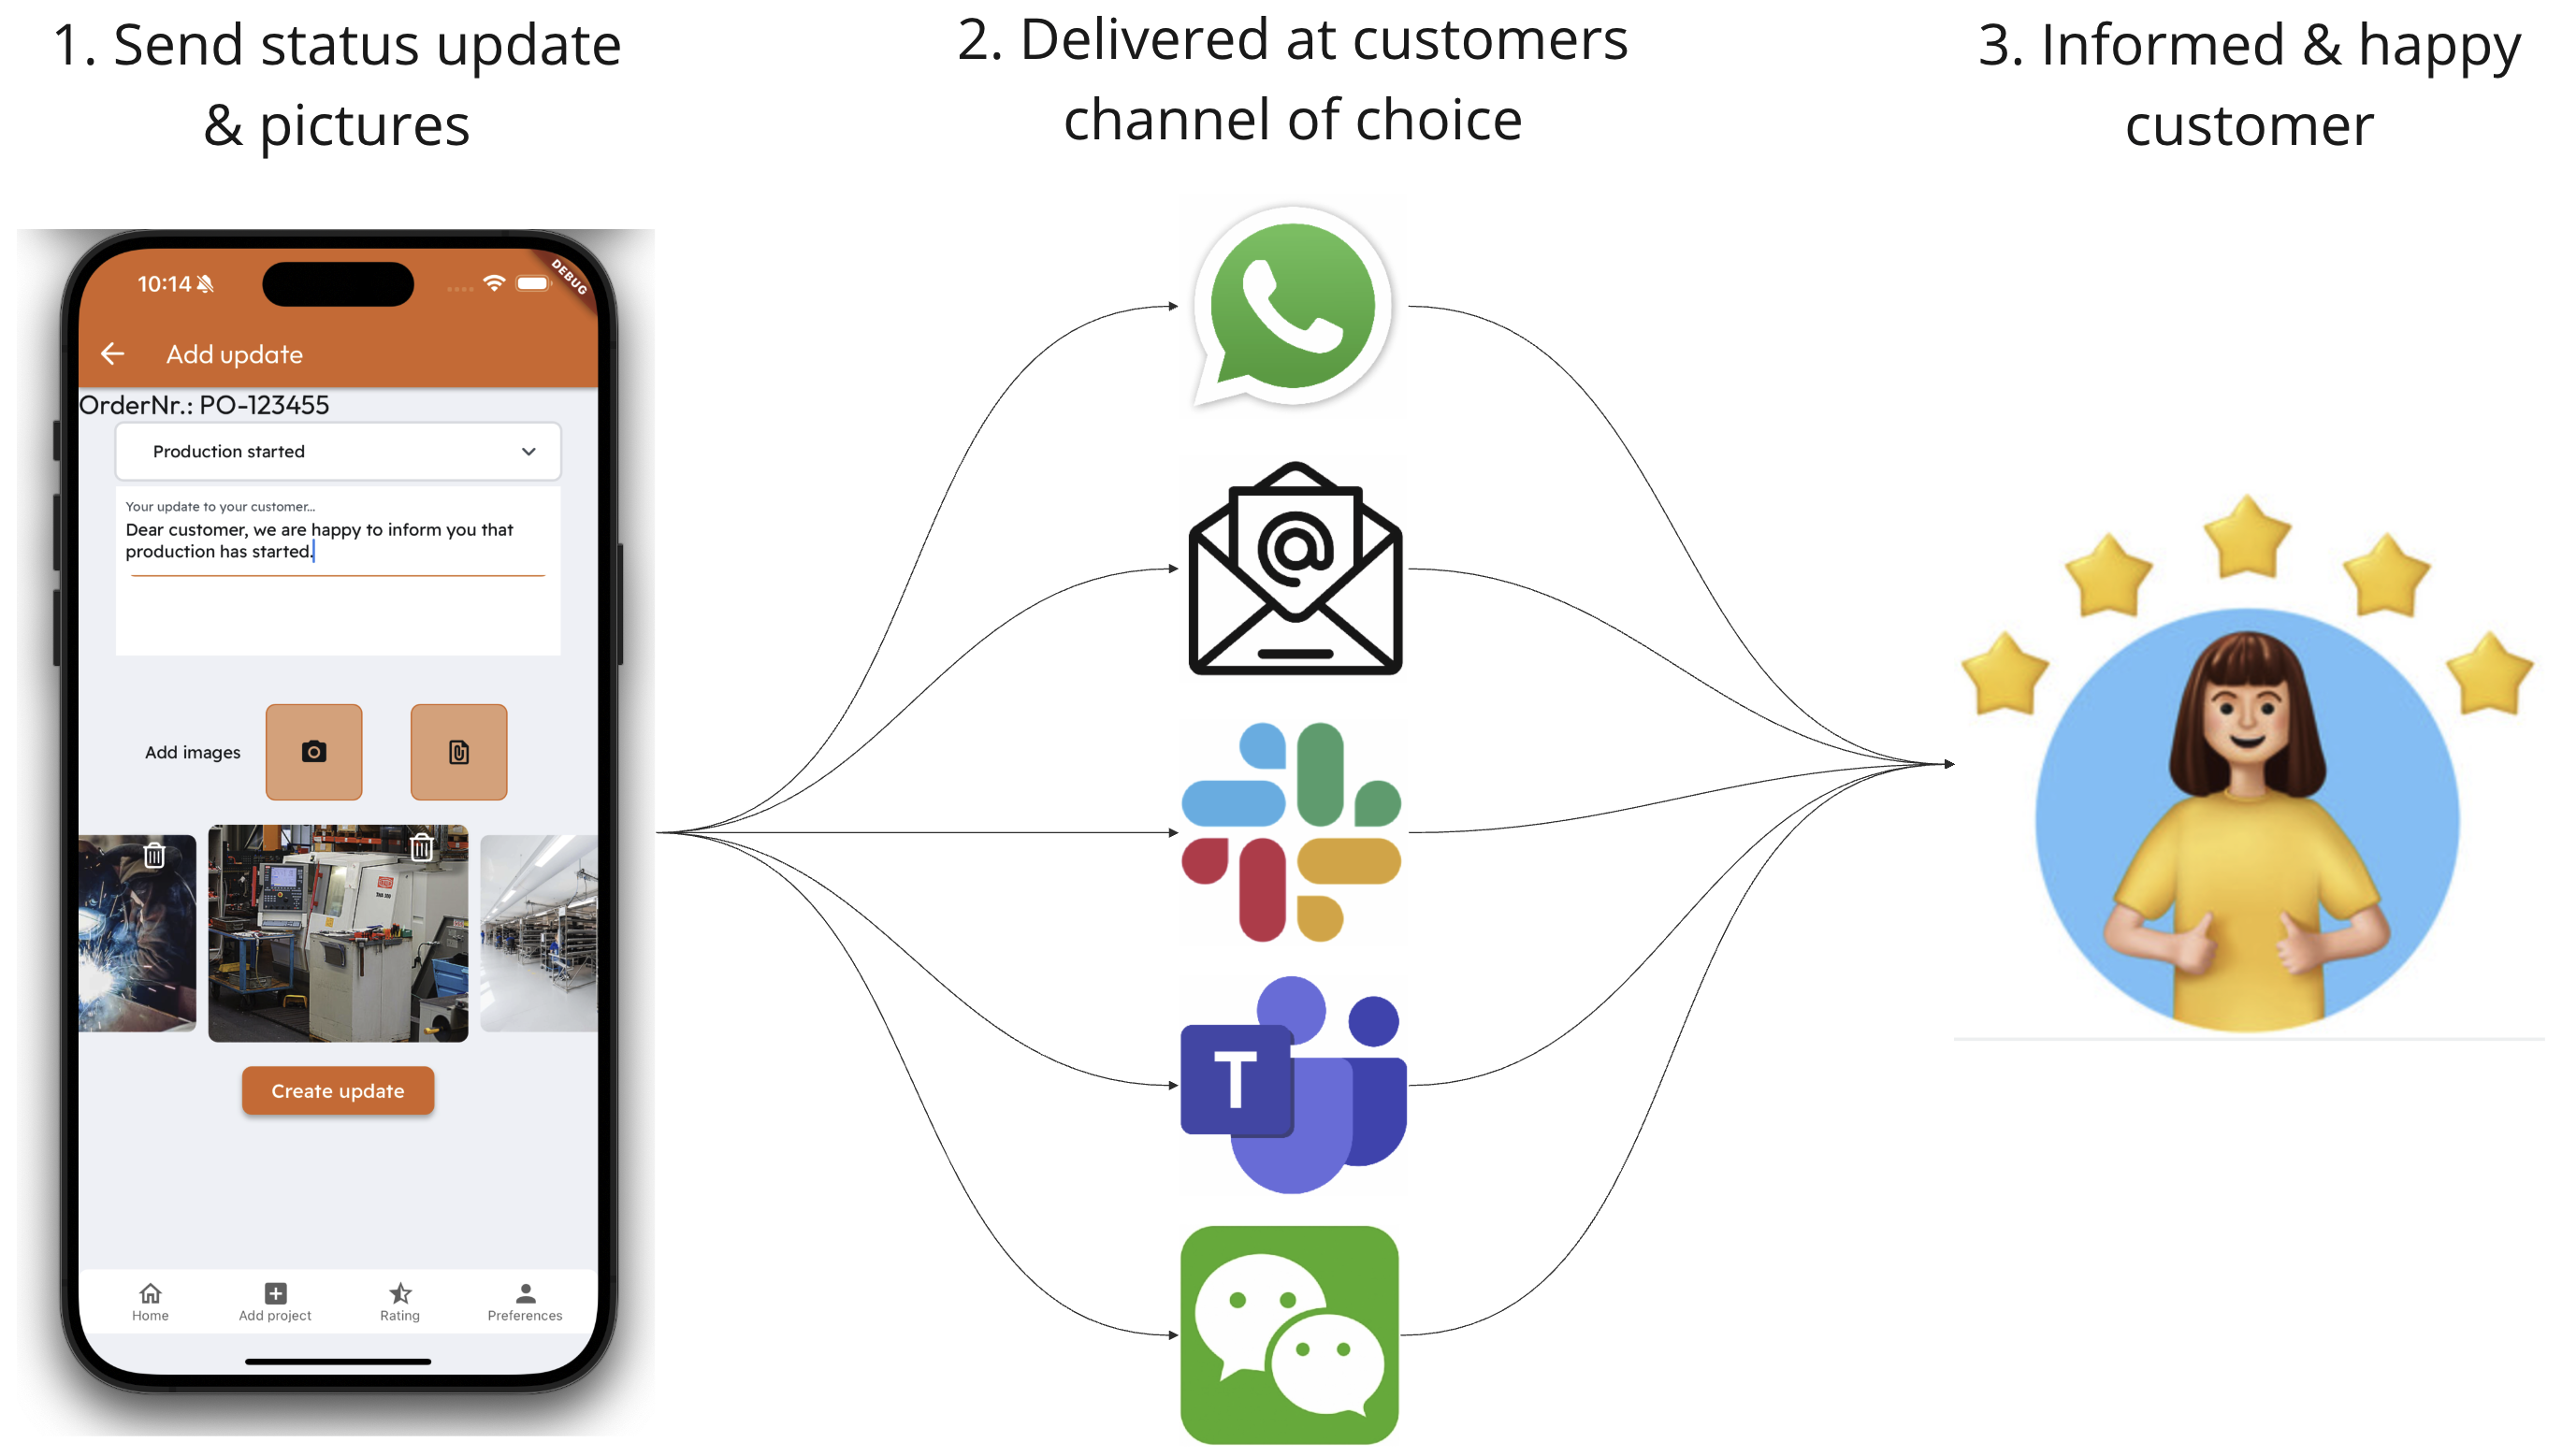 Workflow of cusenga: Create customer status update, deliver at channel of choice, make your customer happy.